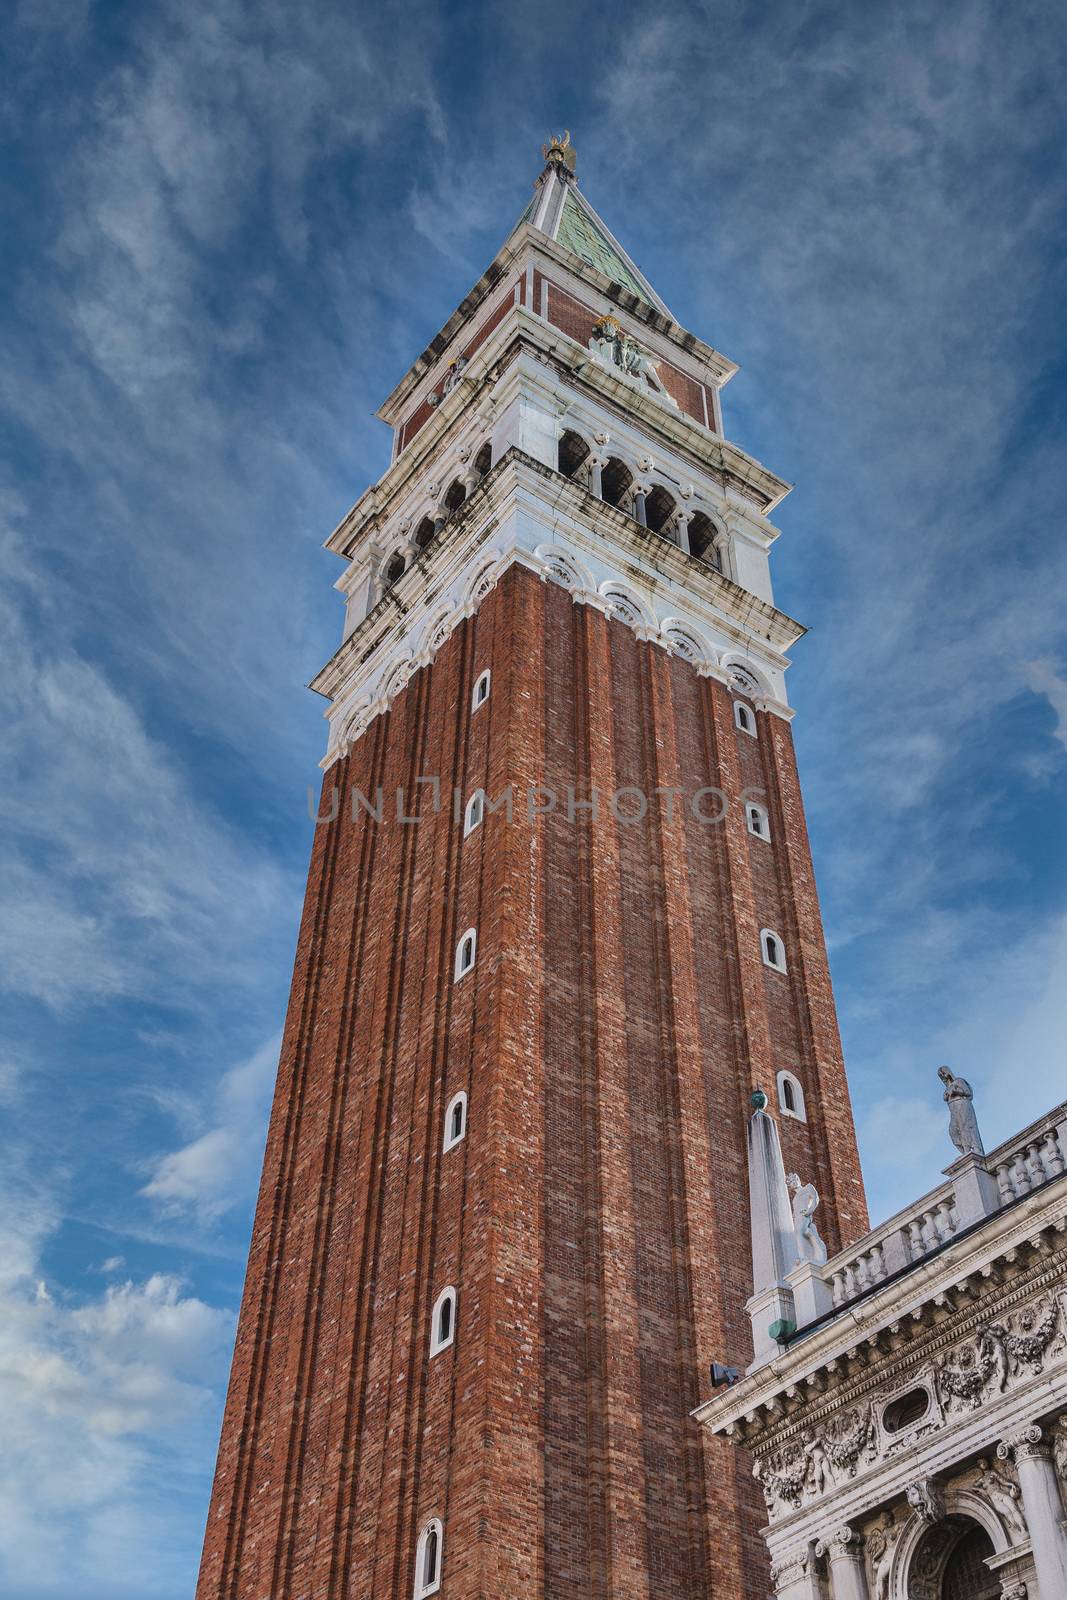 Saint Marks Bell Tower from Angle by dbvirago